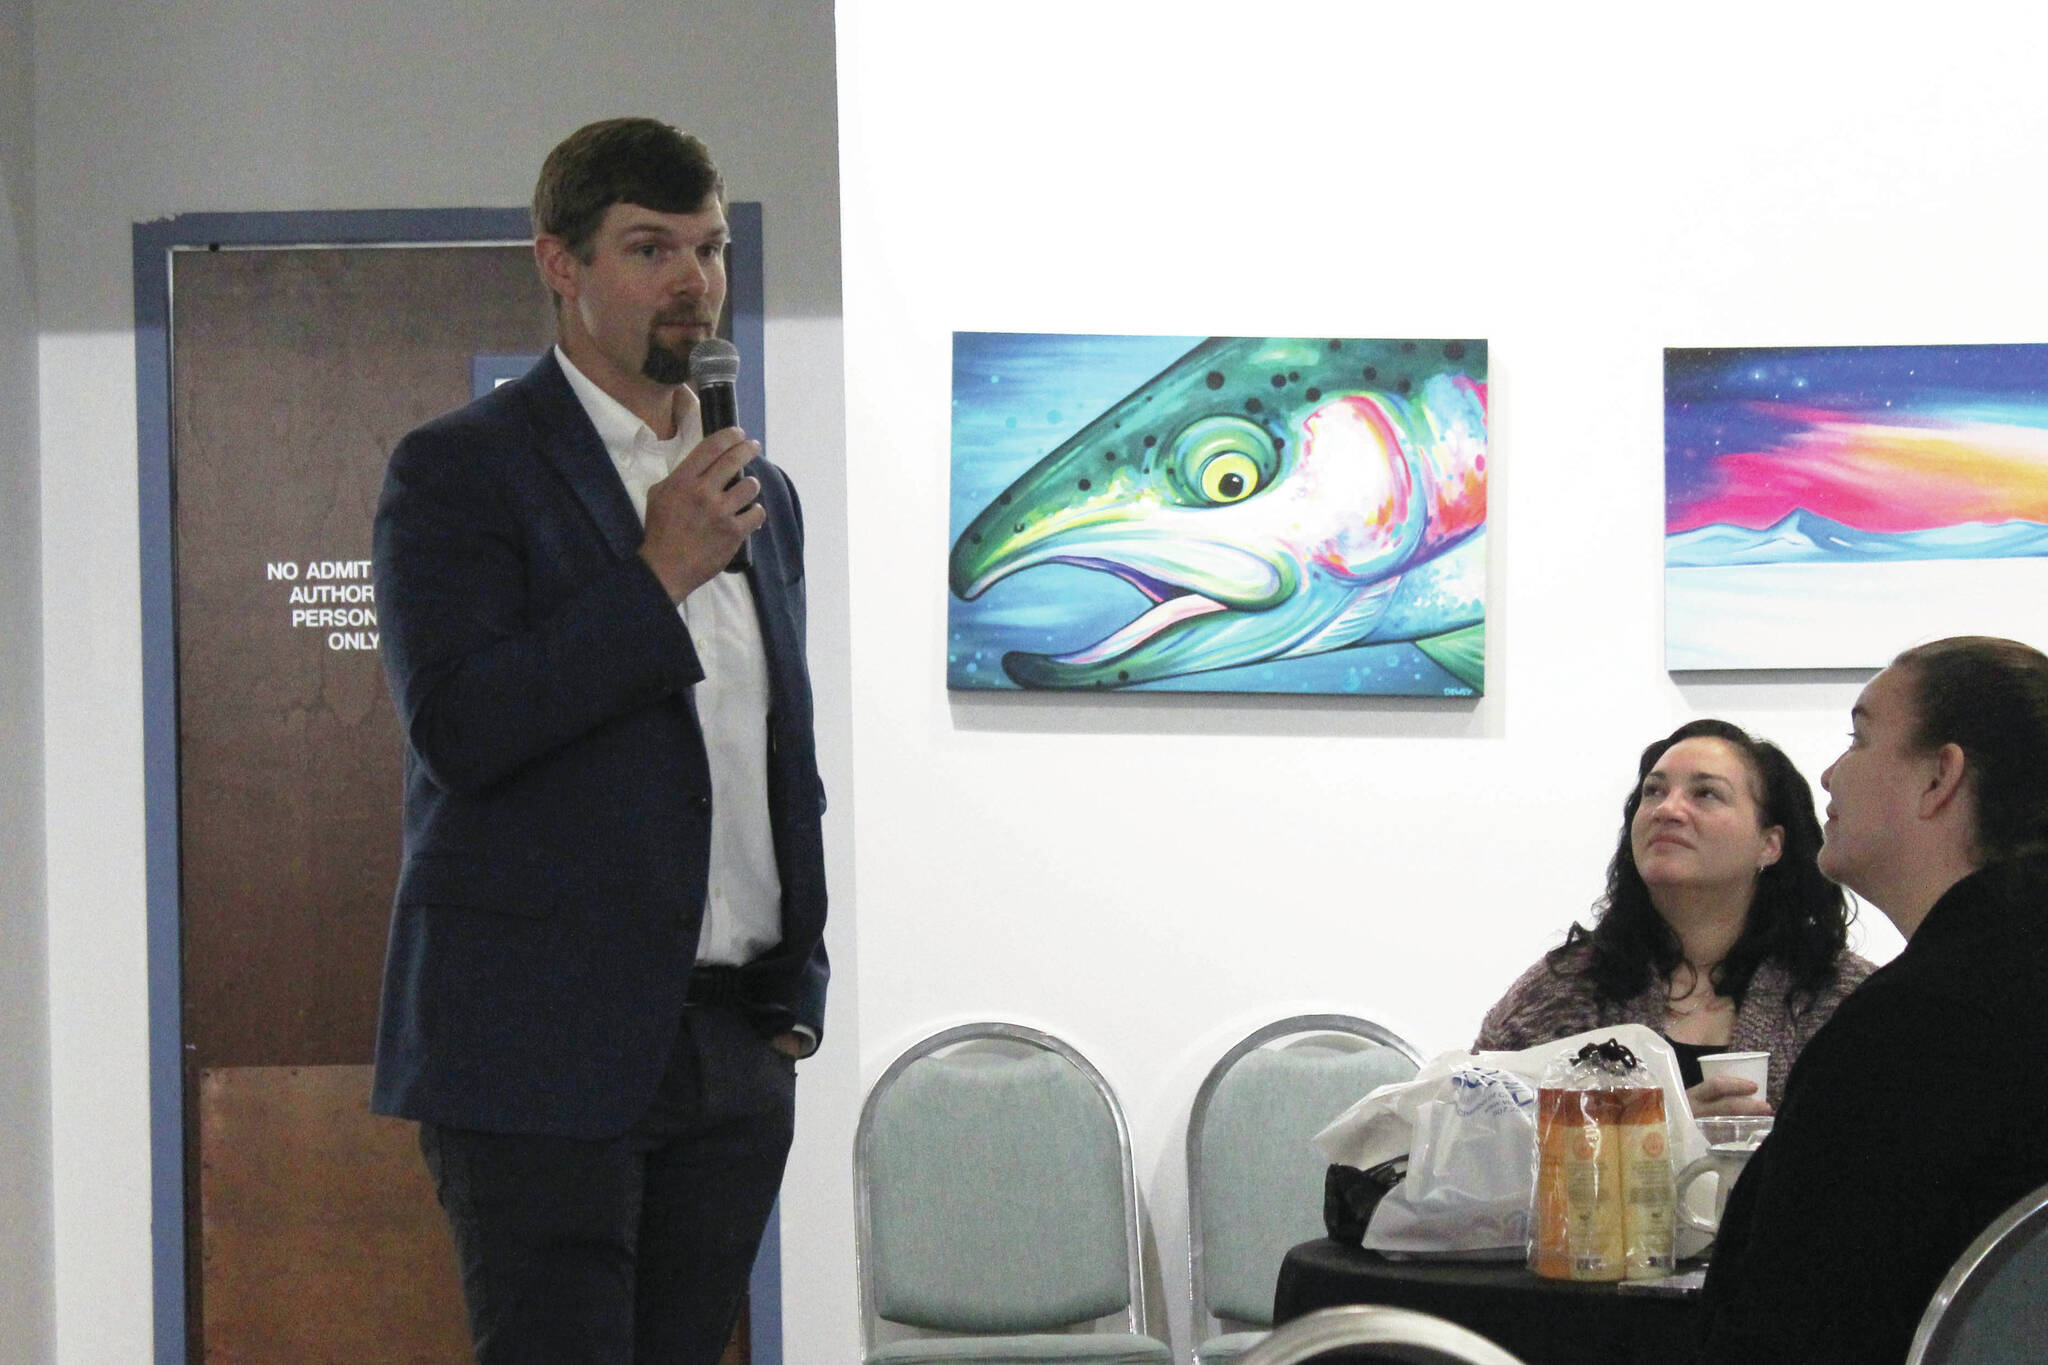 Sen. Jesse Bjorkman, R-Nikiski, fields questions from attendees at a legislative presentation at the Kenai Chamber of Commerce and Visitor Center on Wednesday. (Ashlyn O’Hara/Peninsula Clarion)